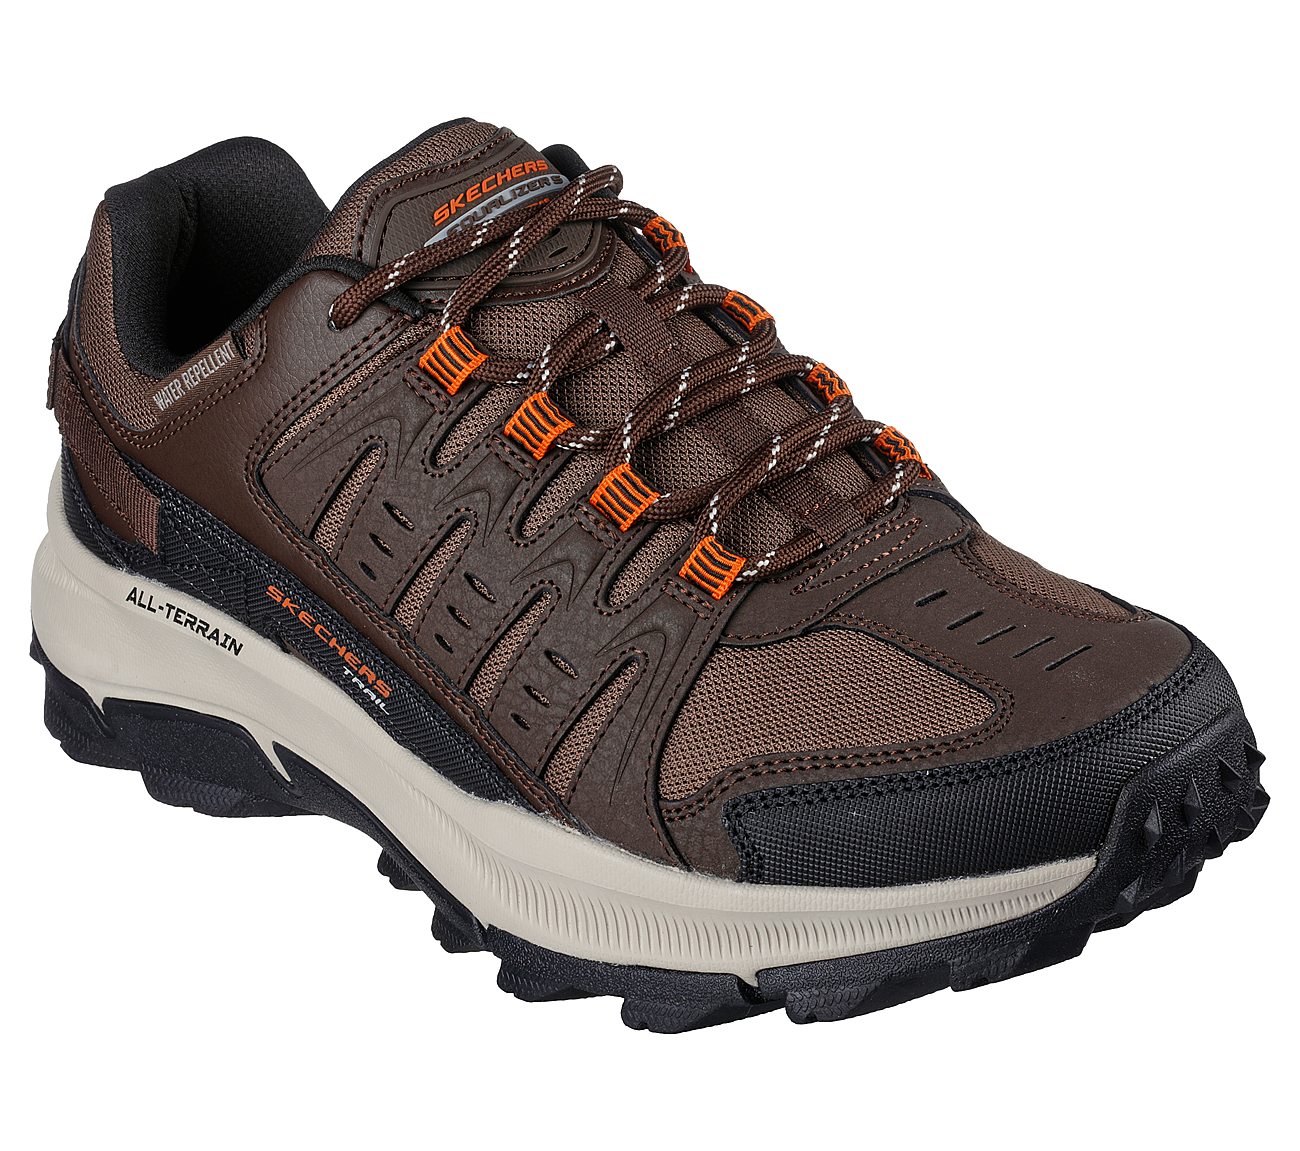 EQUALIZER 5.0 TRAIL - SOLIX, BROWN/ORANGE Footwear Right View